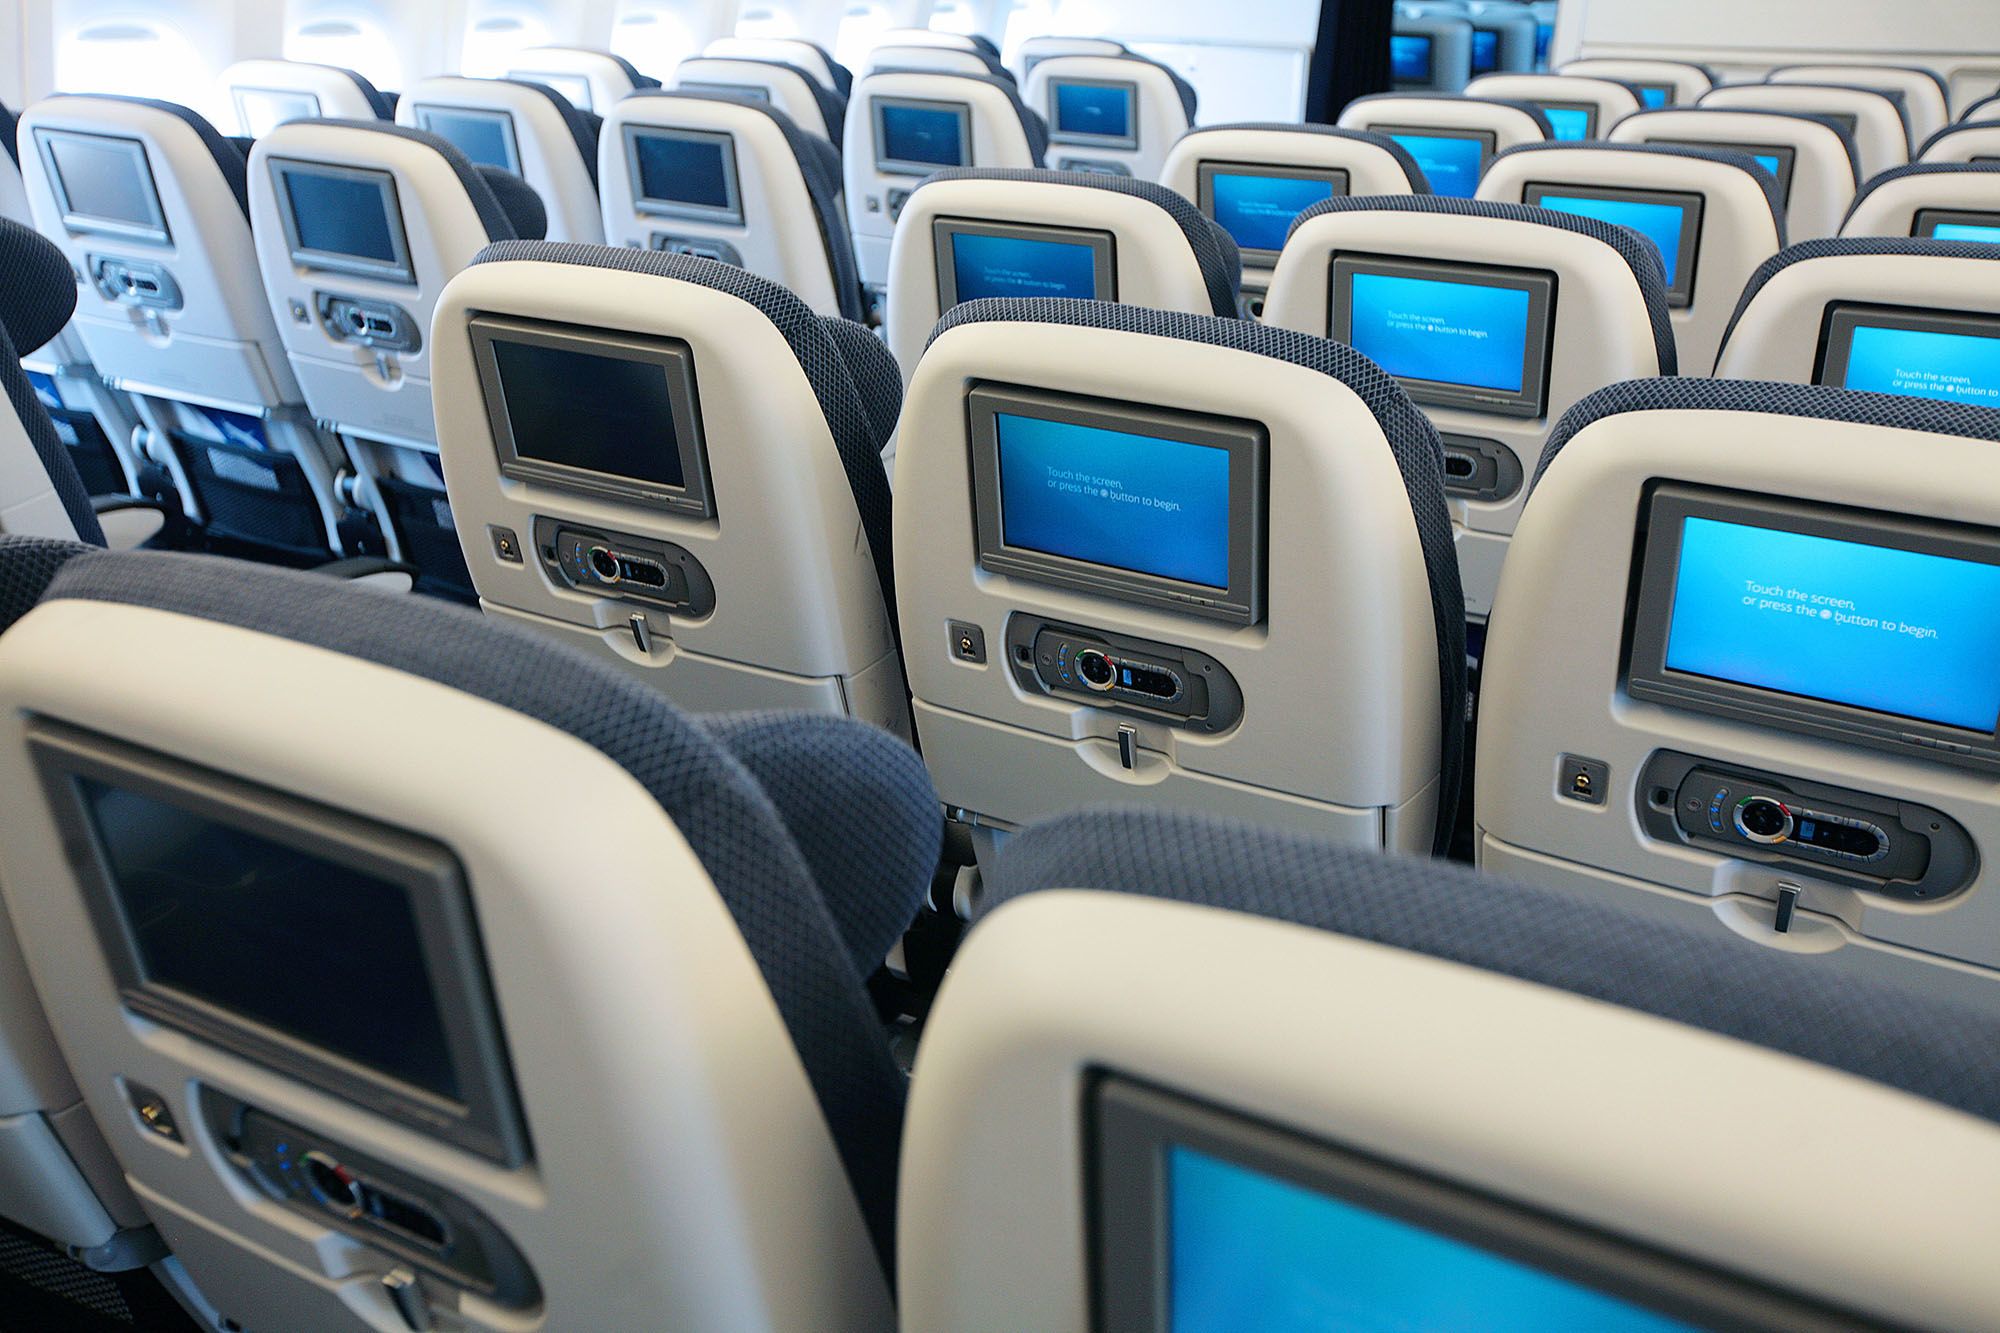 How to Survive a LONG HAUL FLIGHT from a Frequent Flyer 